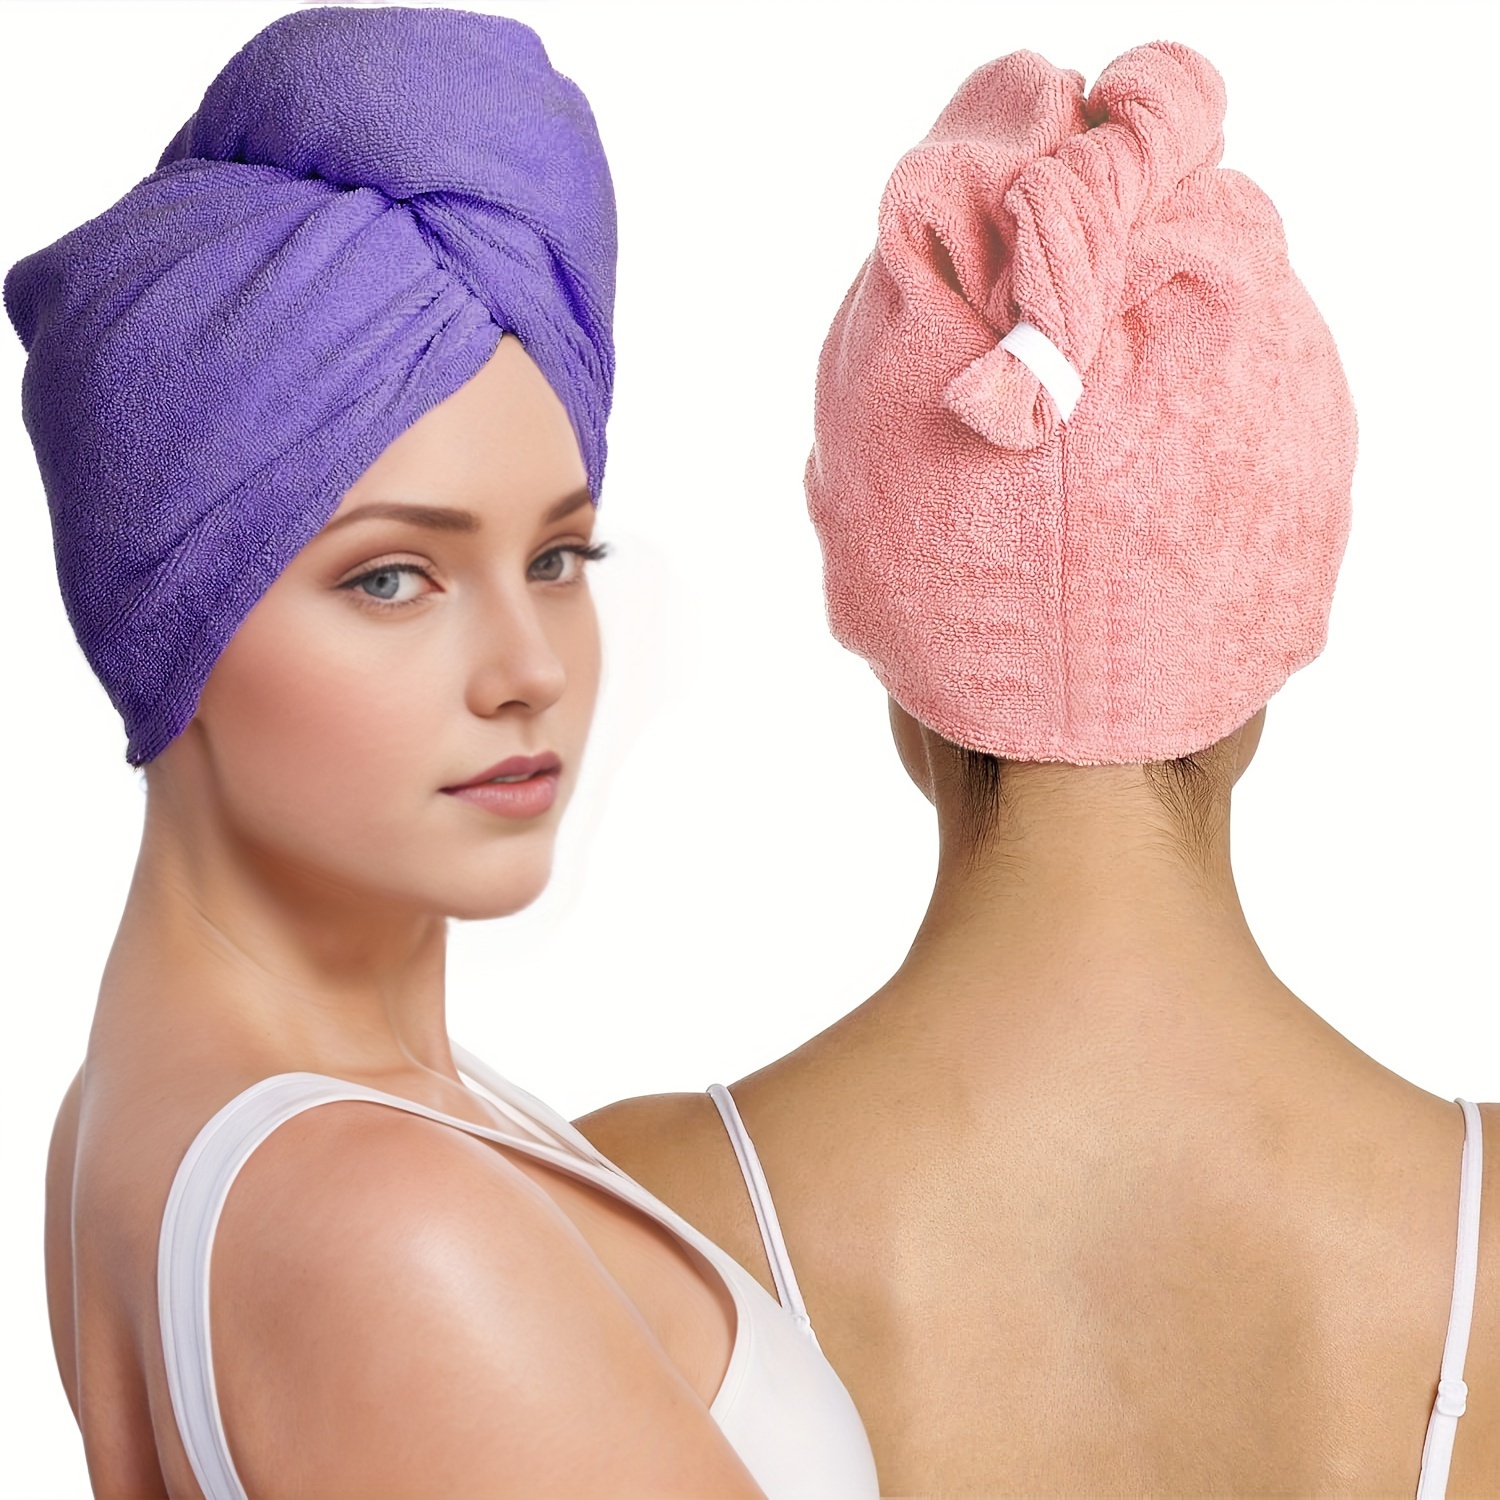 

Microfiber Hair Towel Wrap - For Women, Men - Travel & Bathroom Essential - Quick Dry Hair Turban For Curly, Long & Thick Hair - 2 Pack (purple, Pink)